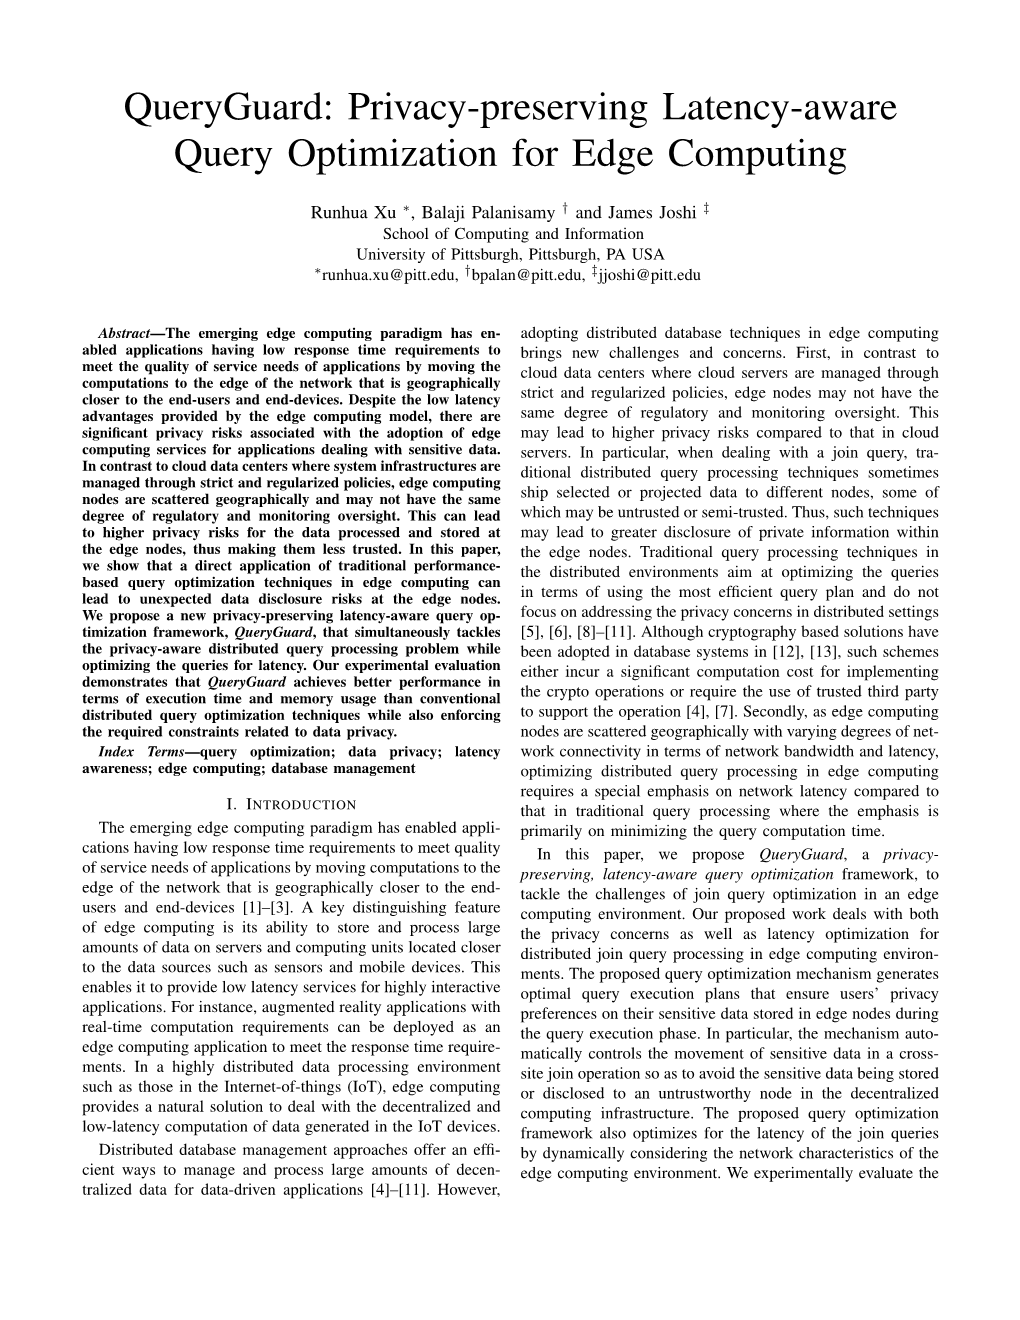 Queryguard: Privacy-Preserving Latency-Aware Query Optimization for Edge Computing